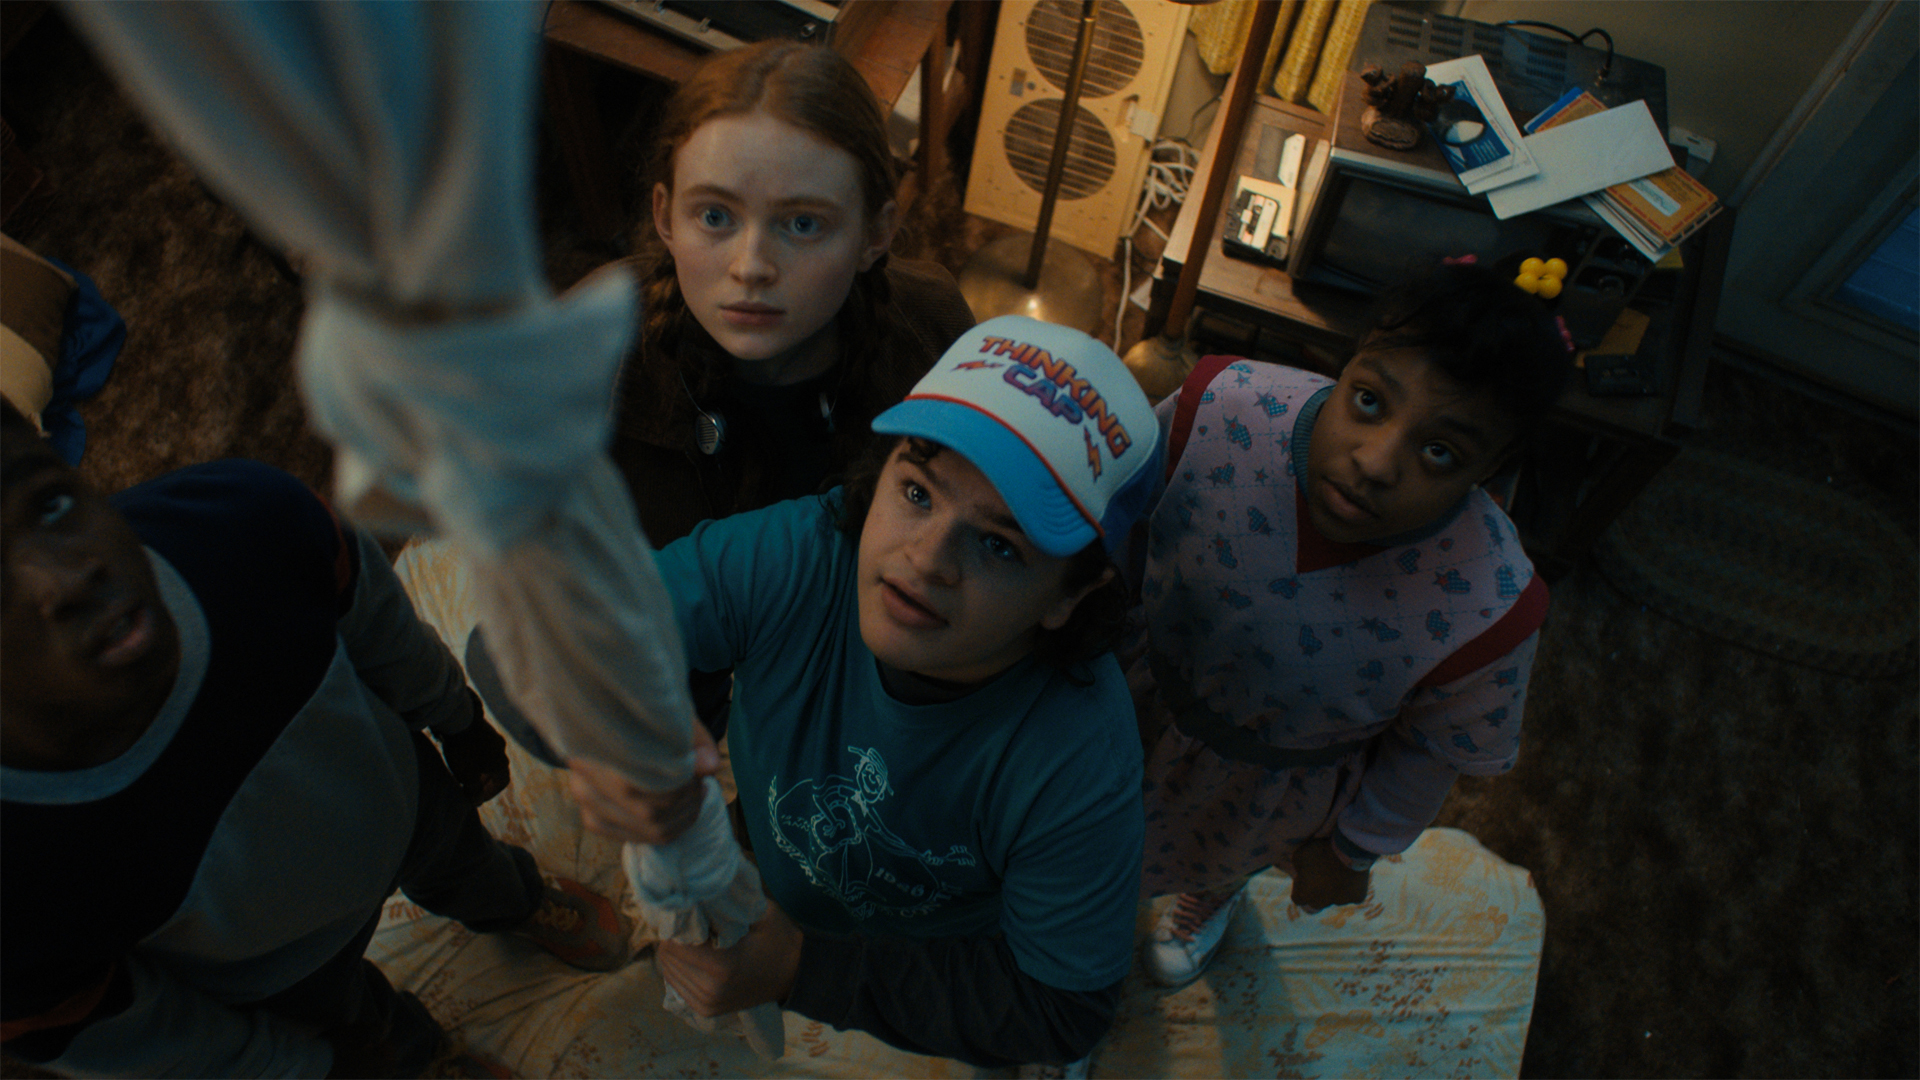 The New Season of “Stranger Things” Shows the Limits of Kids